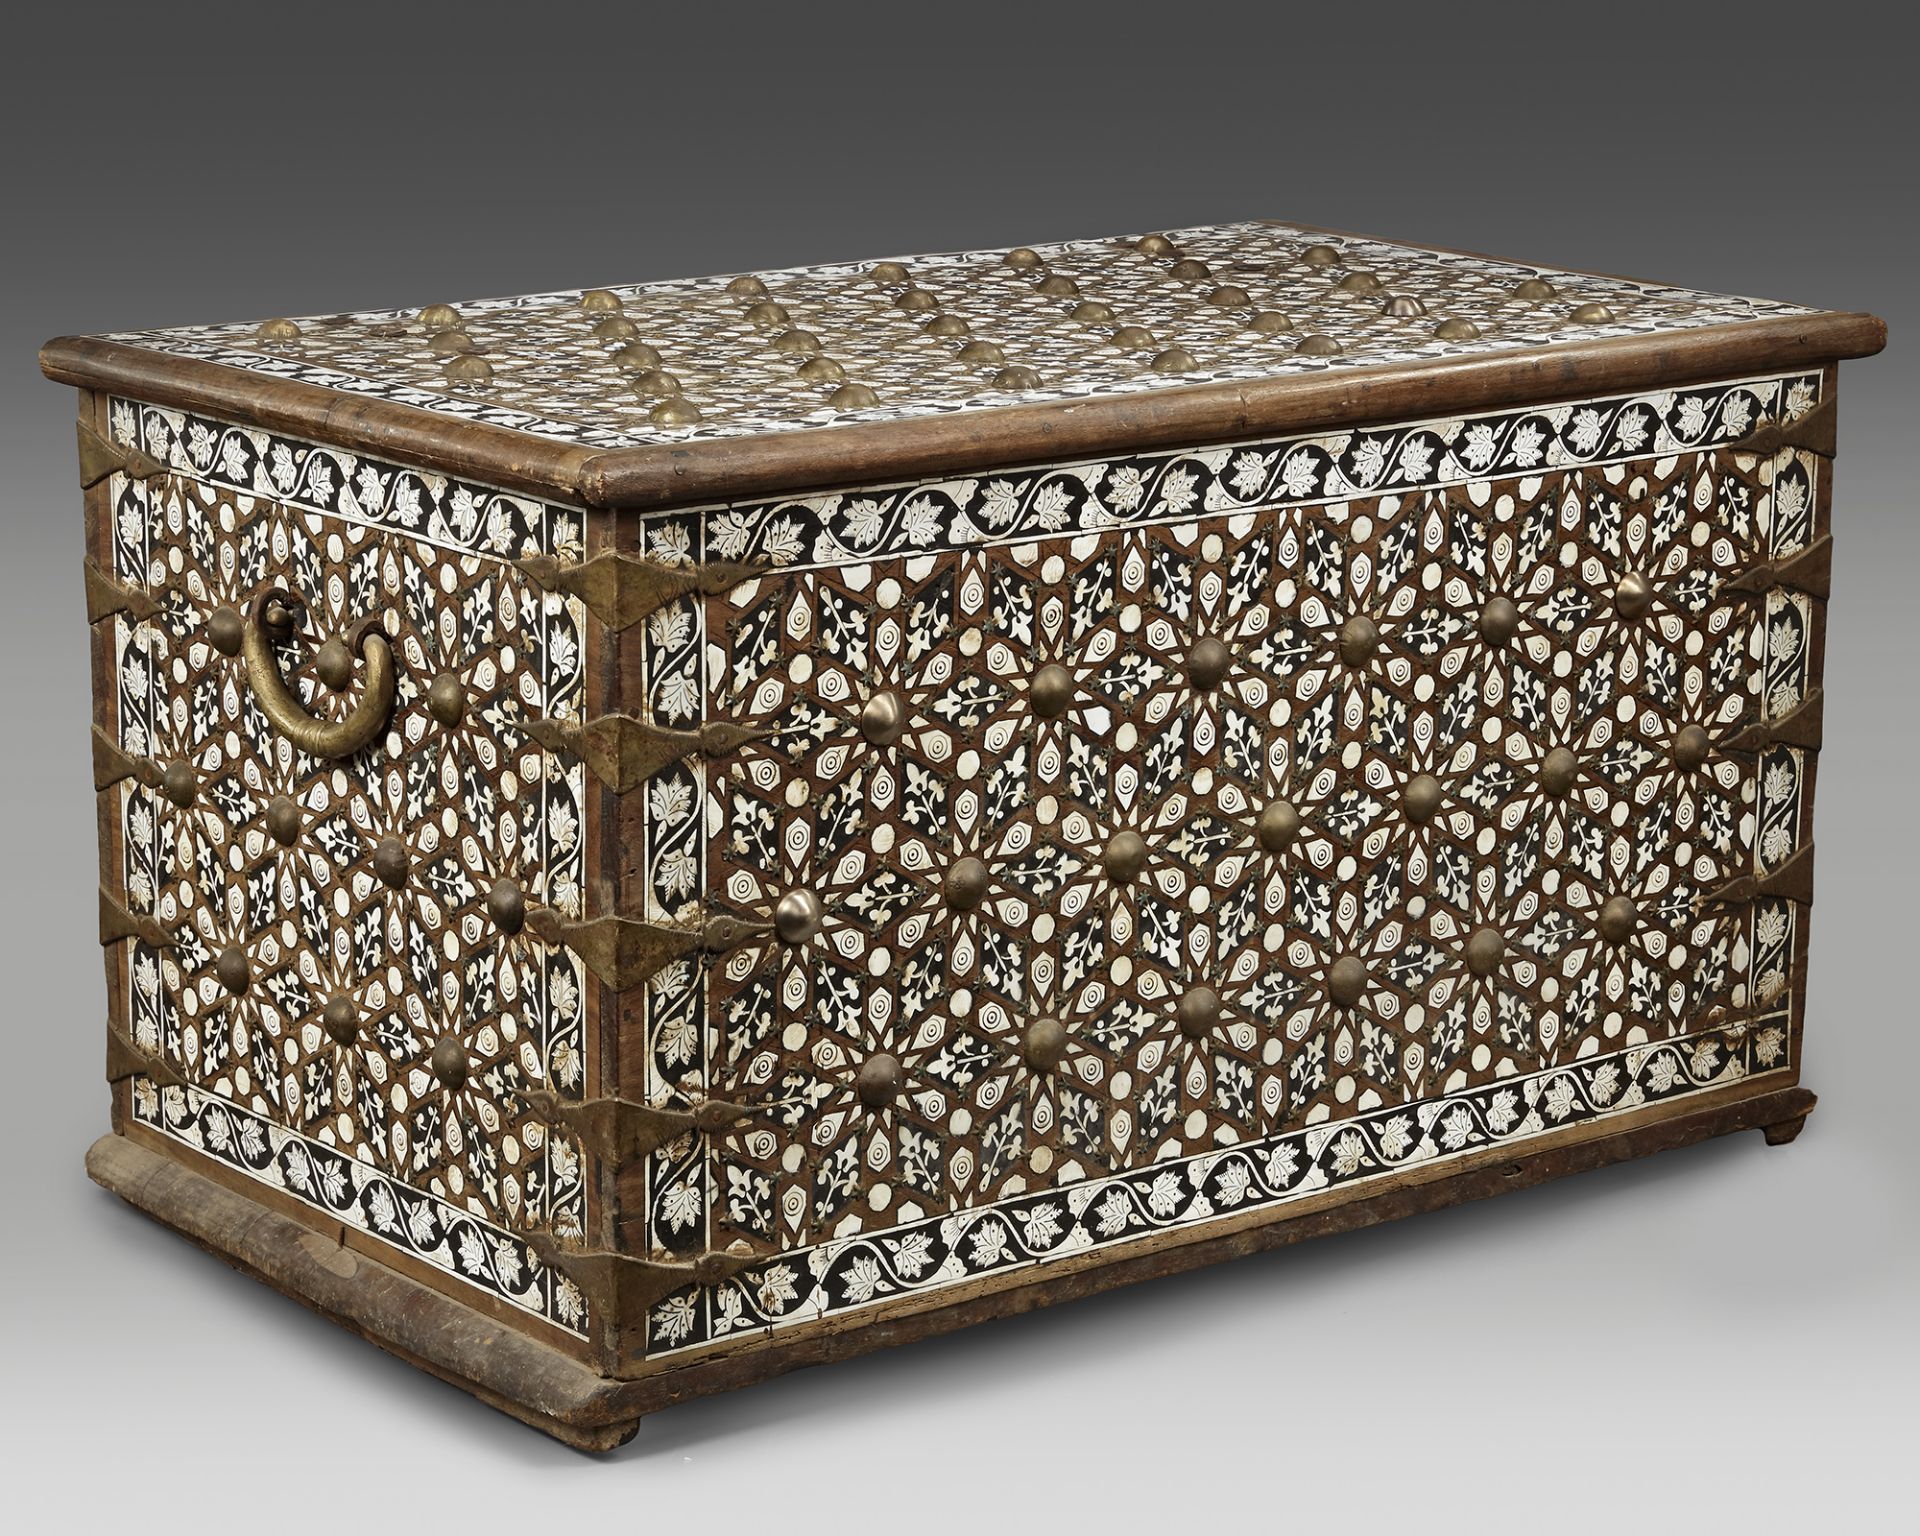 A LARGE OTTOMAN BONE INLAID WOODEN CHEST, SYRIA, LATE 19TH-EARLY 20TH CENTURY - Image 4 of 5